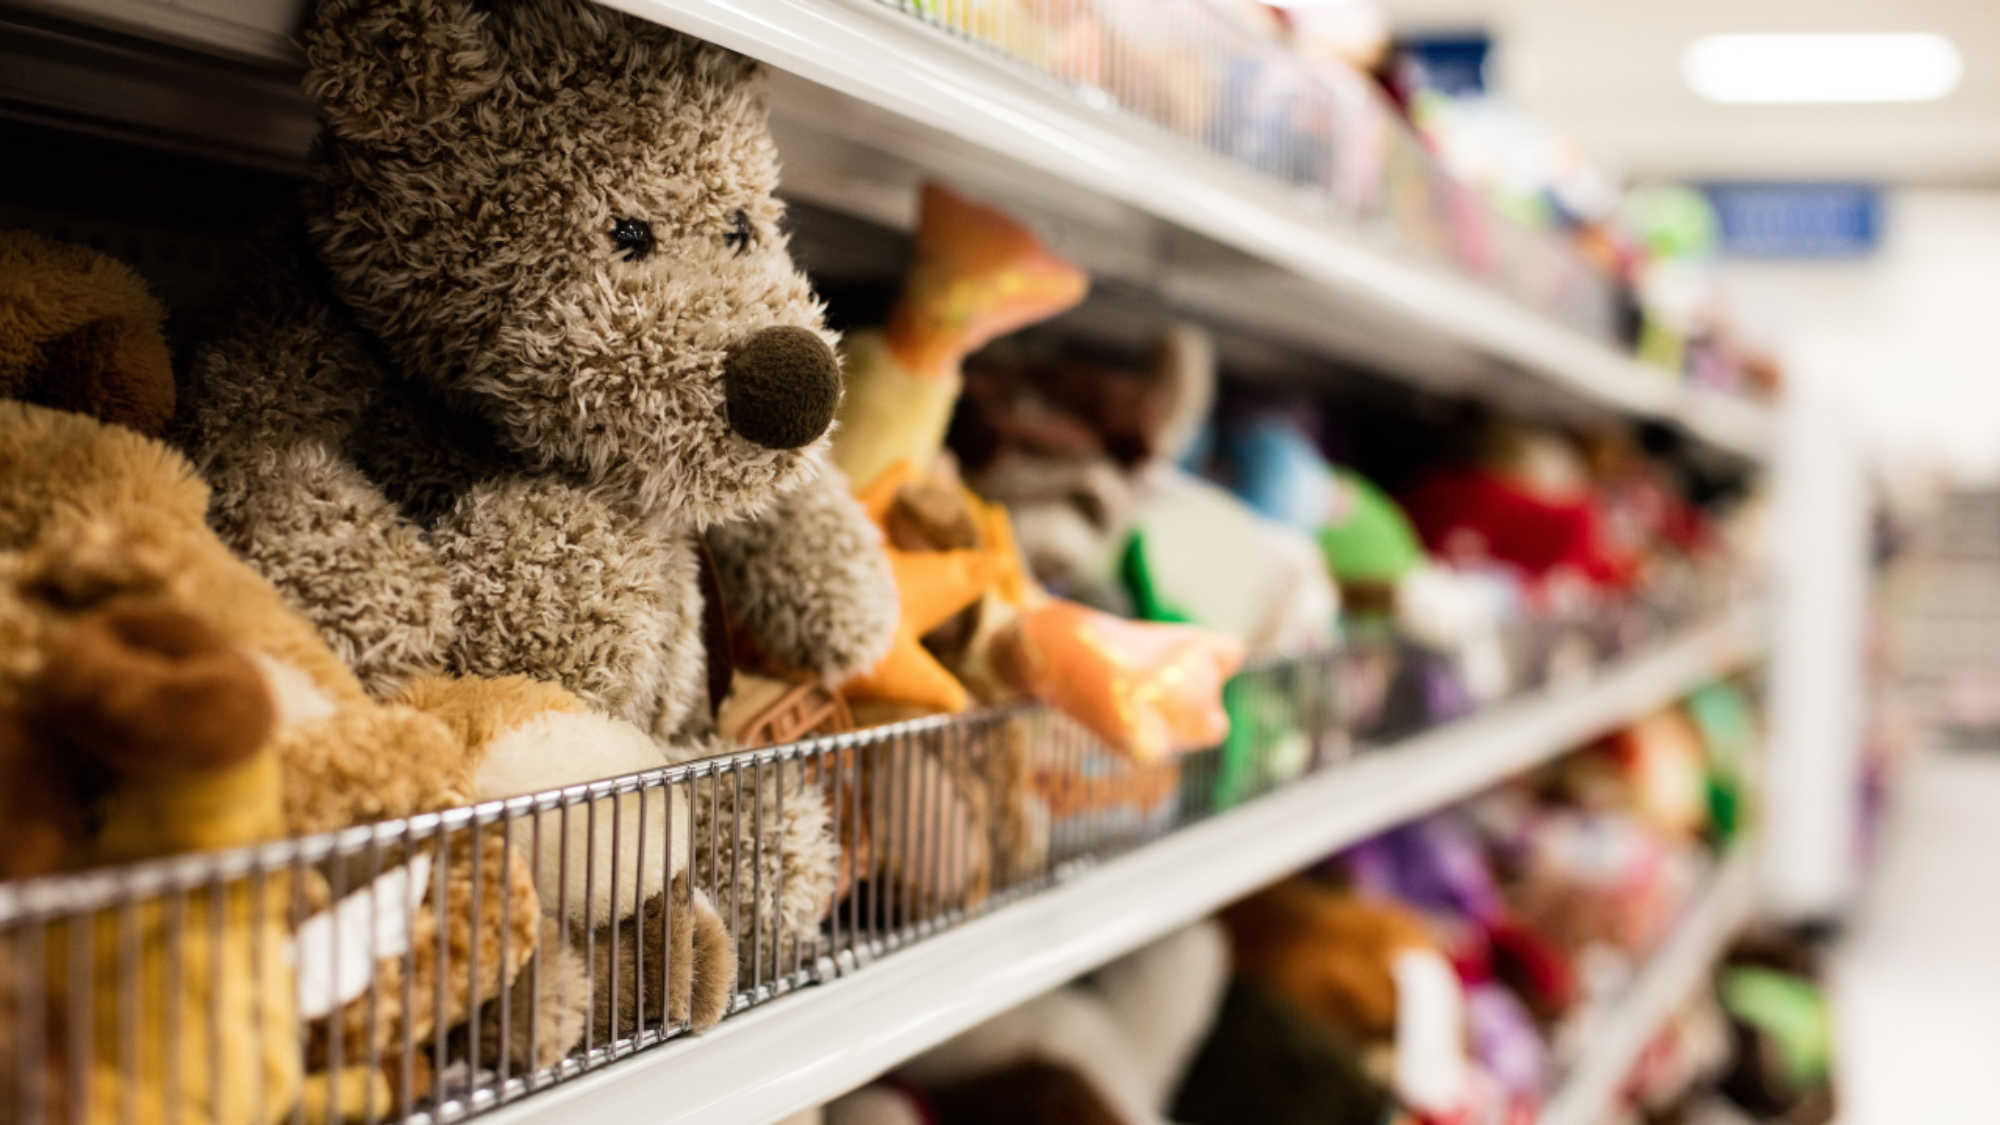 A shelf of stuffed animals at a Deseret Industries store, featuring a cuddly teddy bear